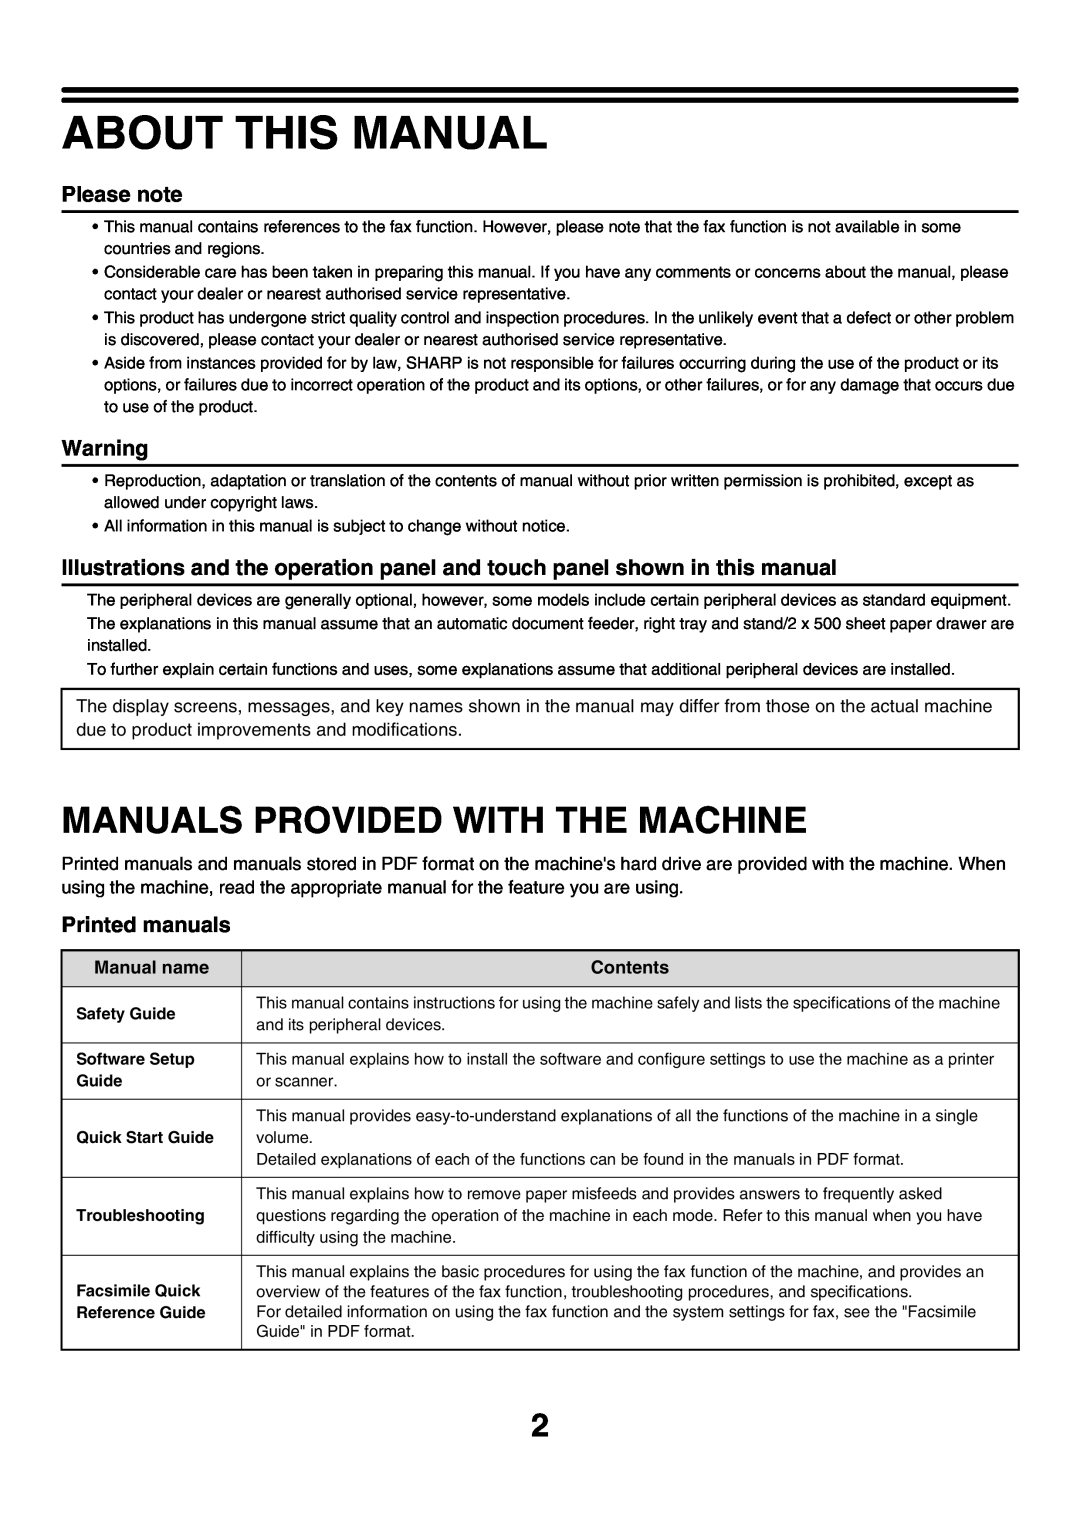 Sharp MX-2700G About This Manual, Manuals Provided With The Machine, Please note, Printed manuals, Manual name, Contents 